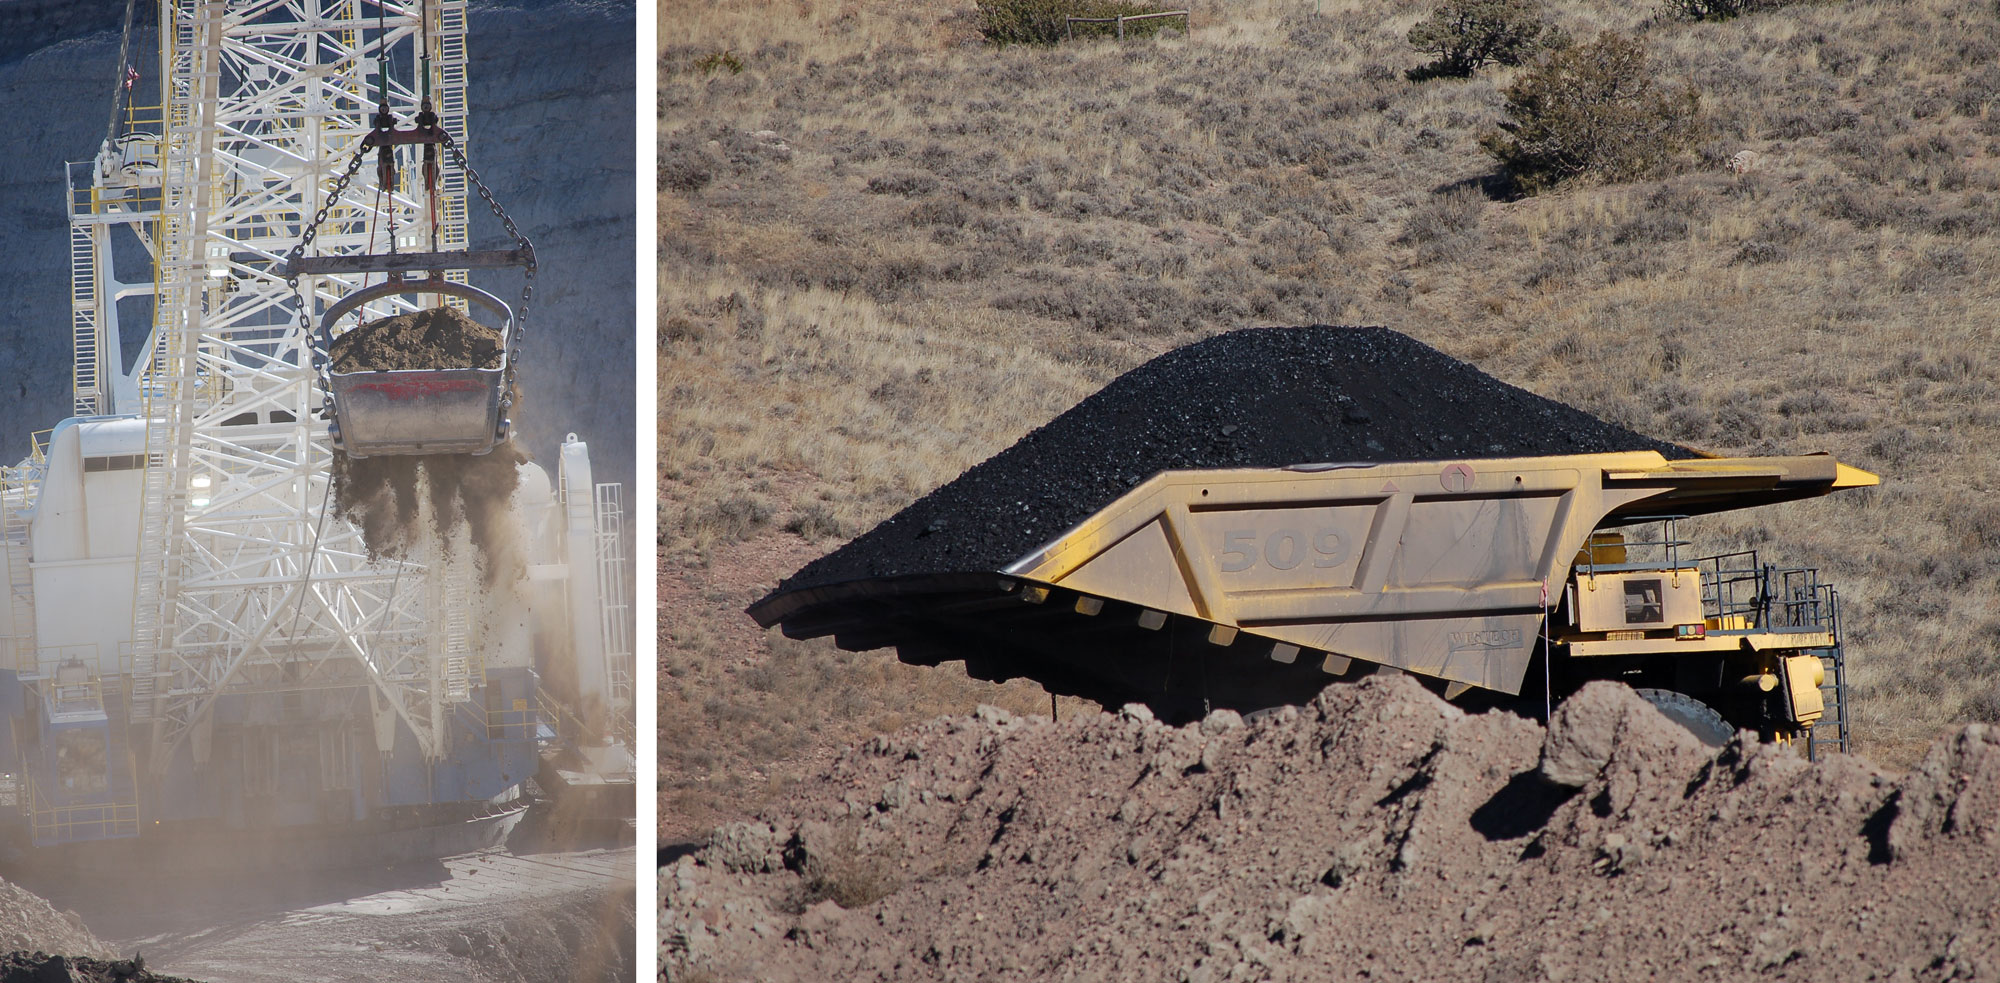 2-panel image showing machinery in the Spring Creek Mine, Montana. Panel 1: Photograph of a dragline excavator scooping up rock. The excavator is painted white. Panel 2: Photograph of a large yellow truck with a bed full of coal.